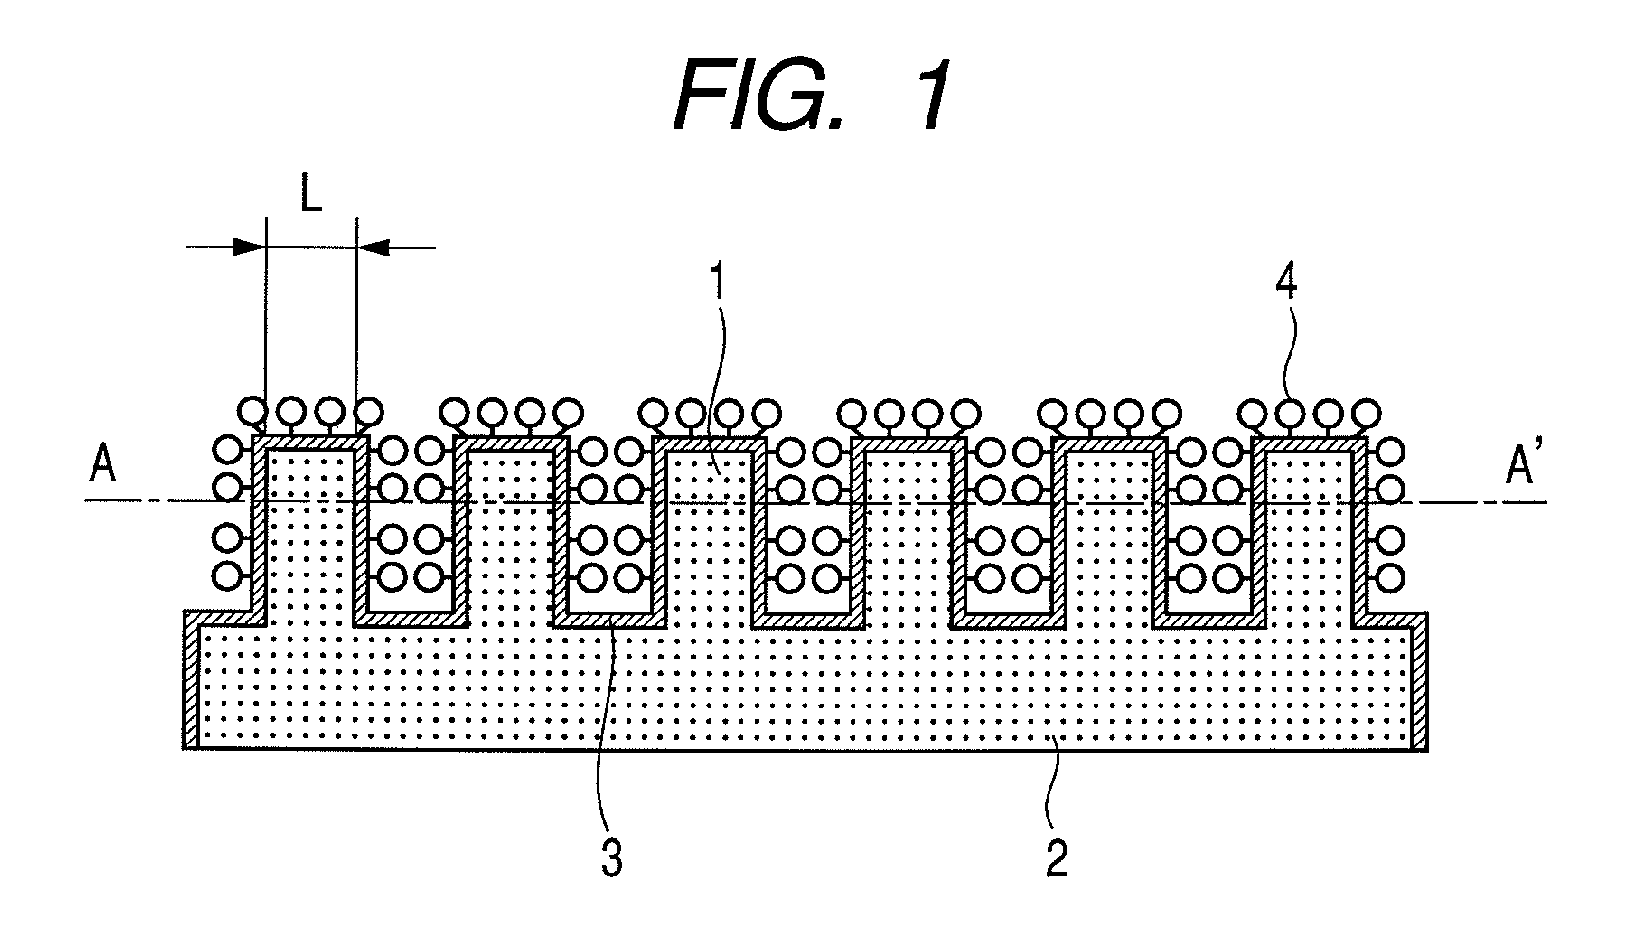 Substrate for mass spectrometry, mass spectrometry, and mass spectrometer